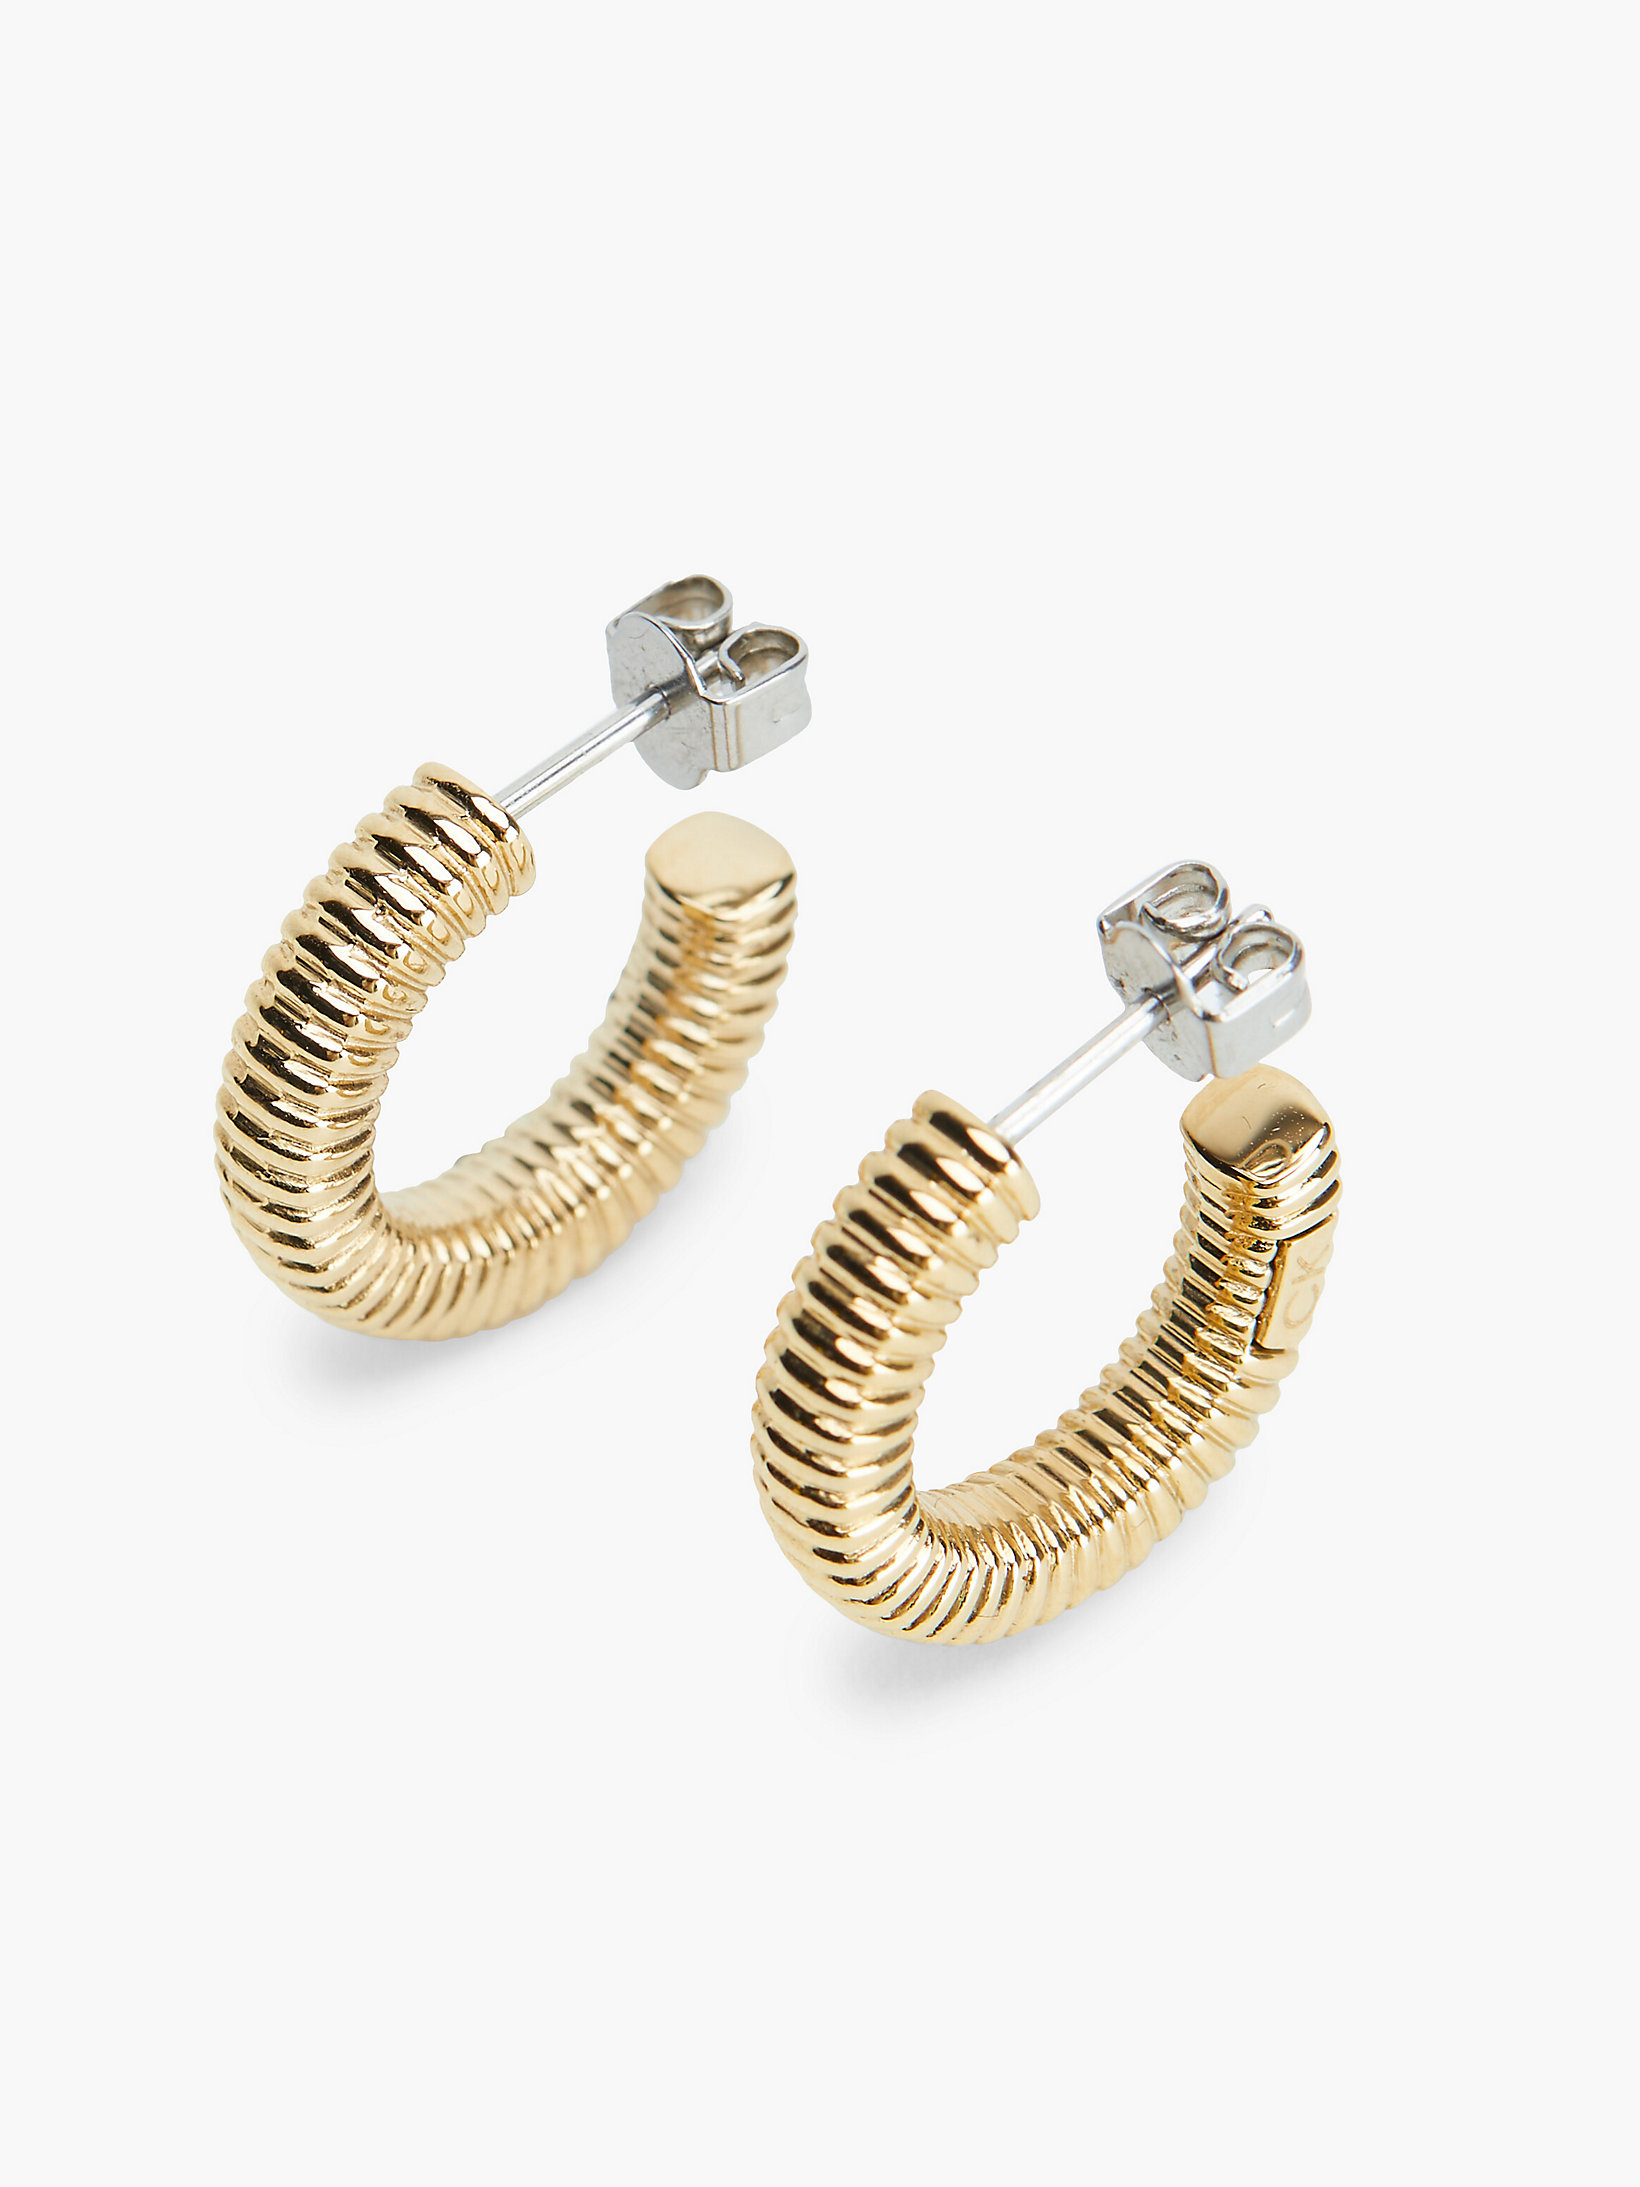 Gold Earrings - Playful Repetition undefined women Calvin Klein